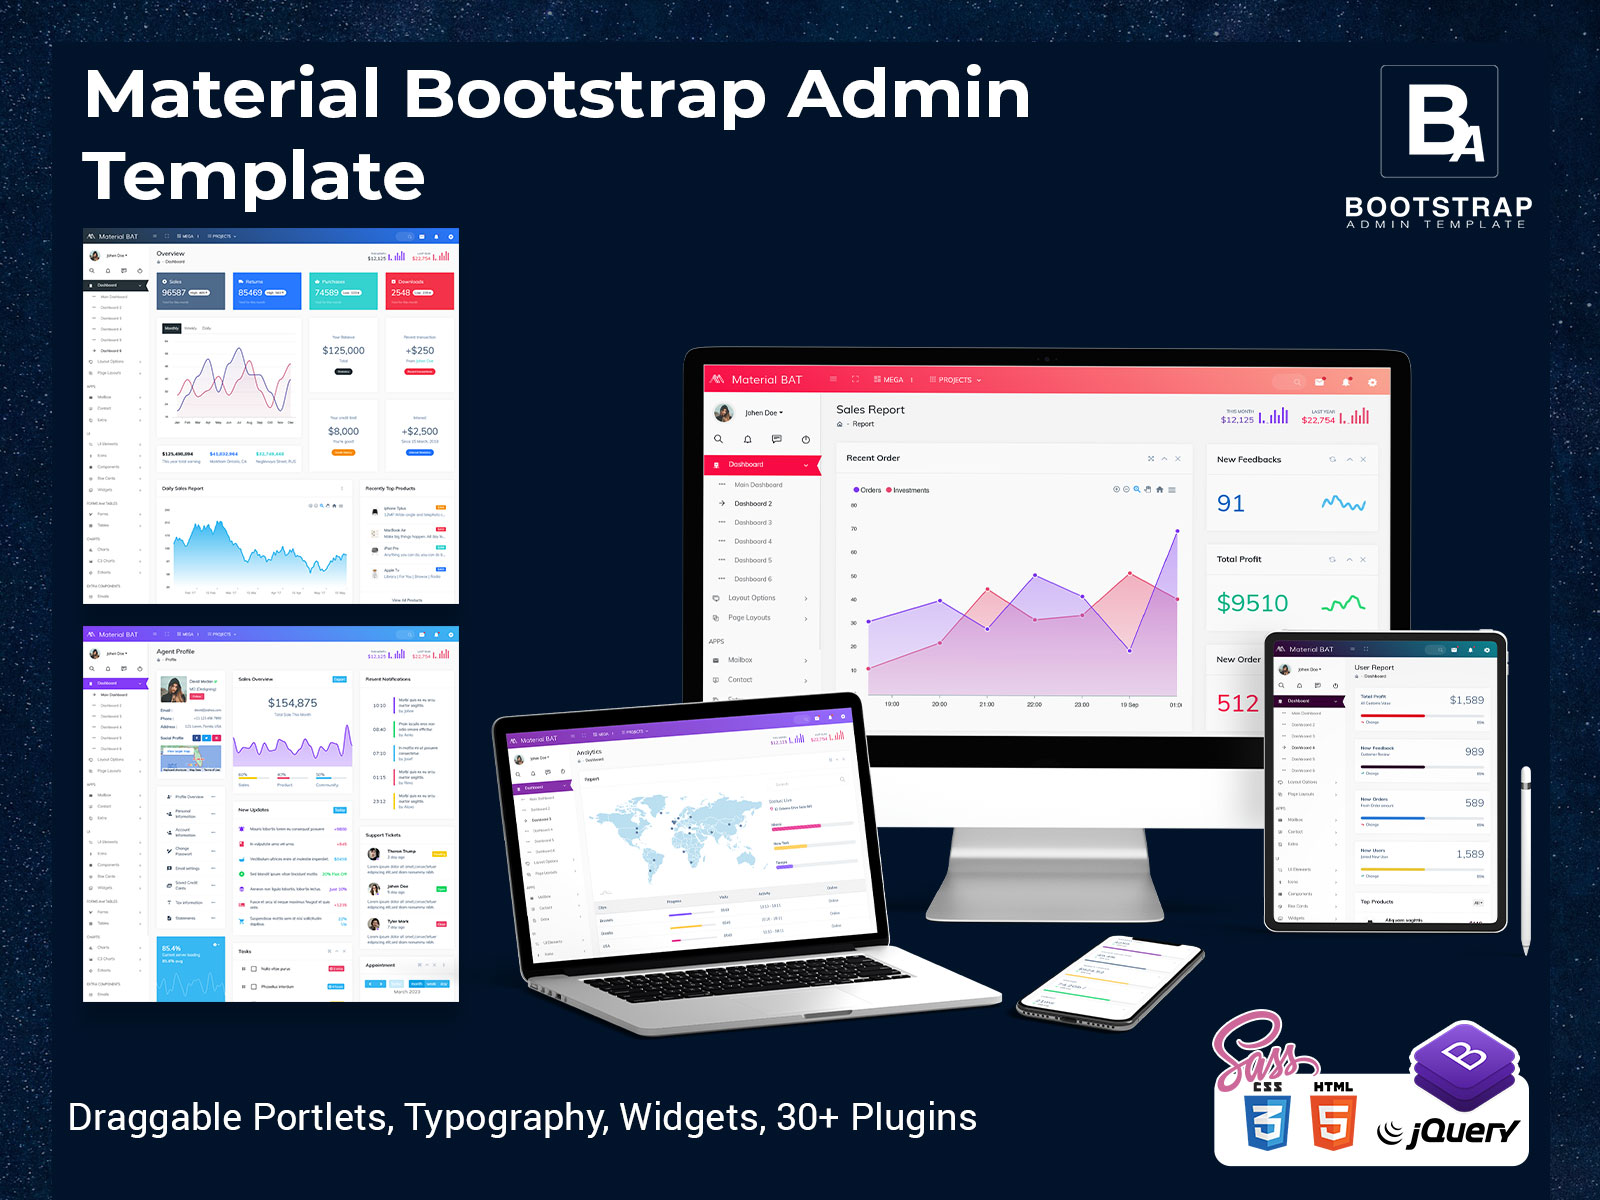 Material Bootstrap Admin Template